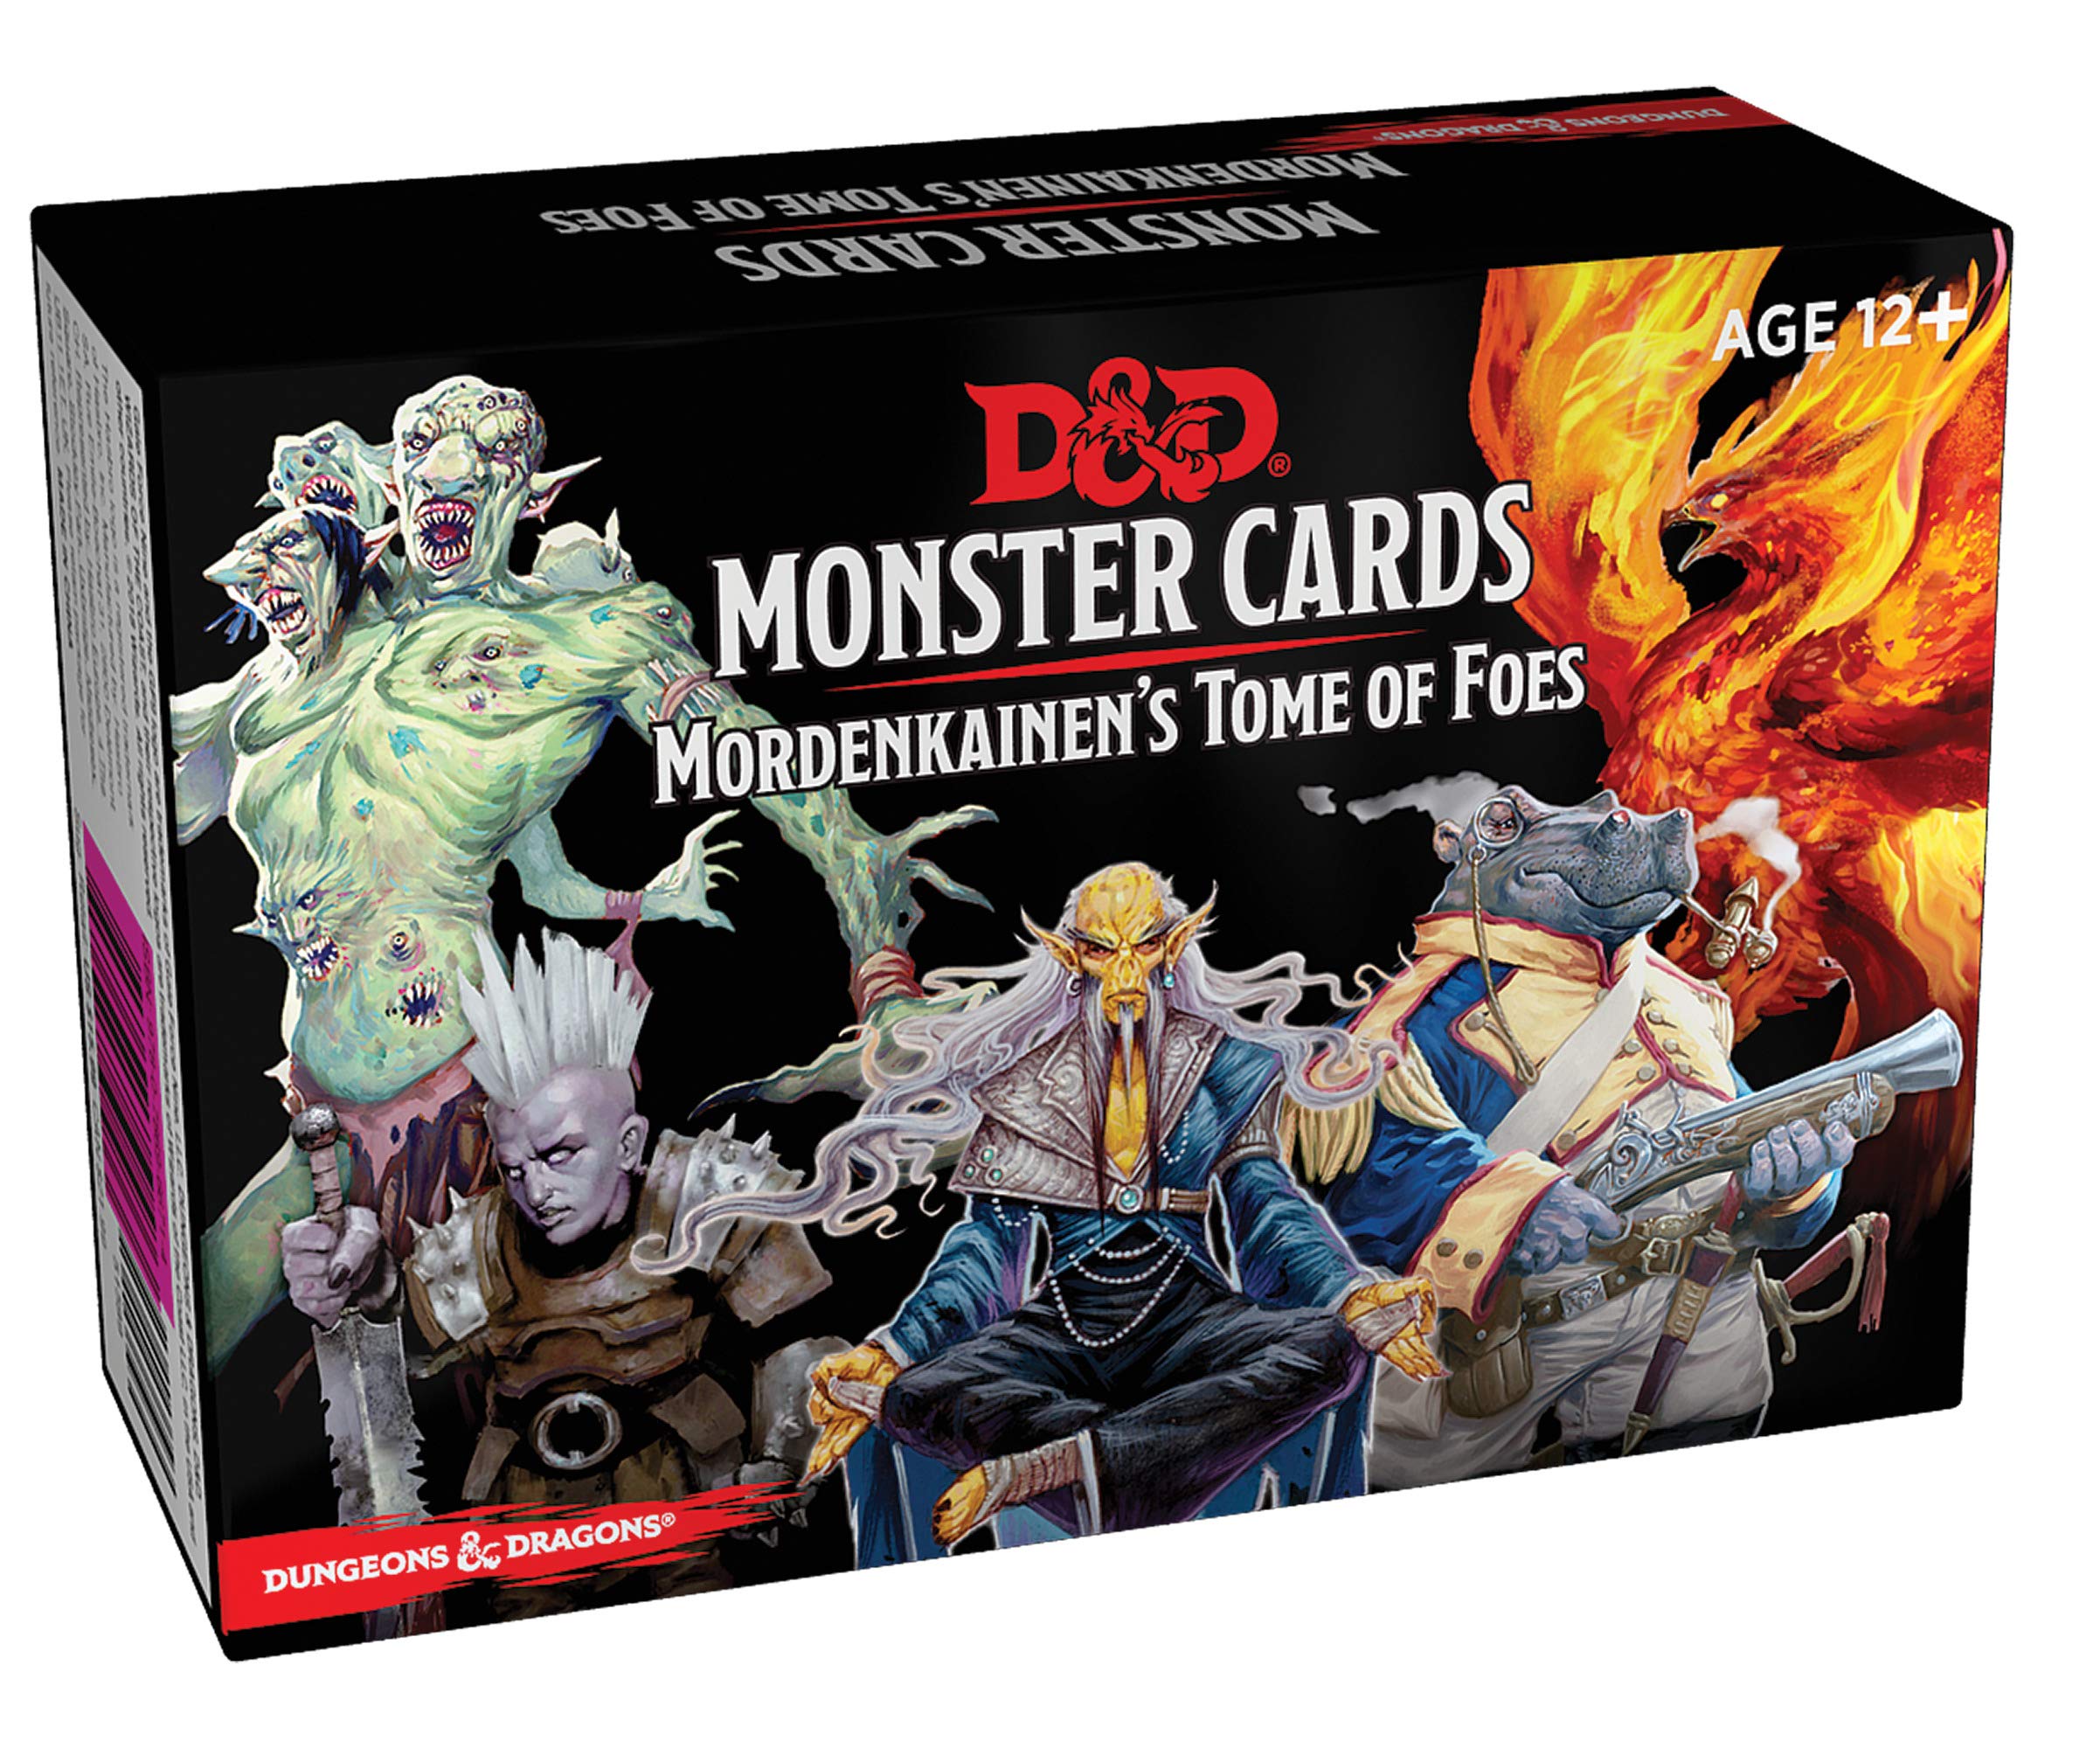 Dungeons & Dragons Monster Cards Mordenkainen's Tome of Foes